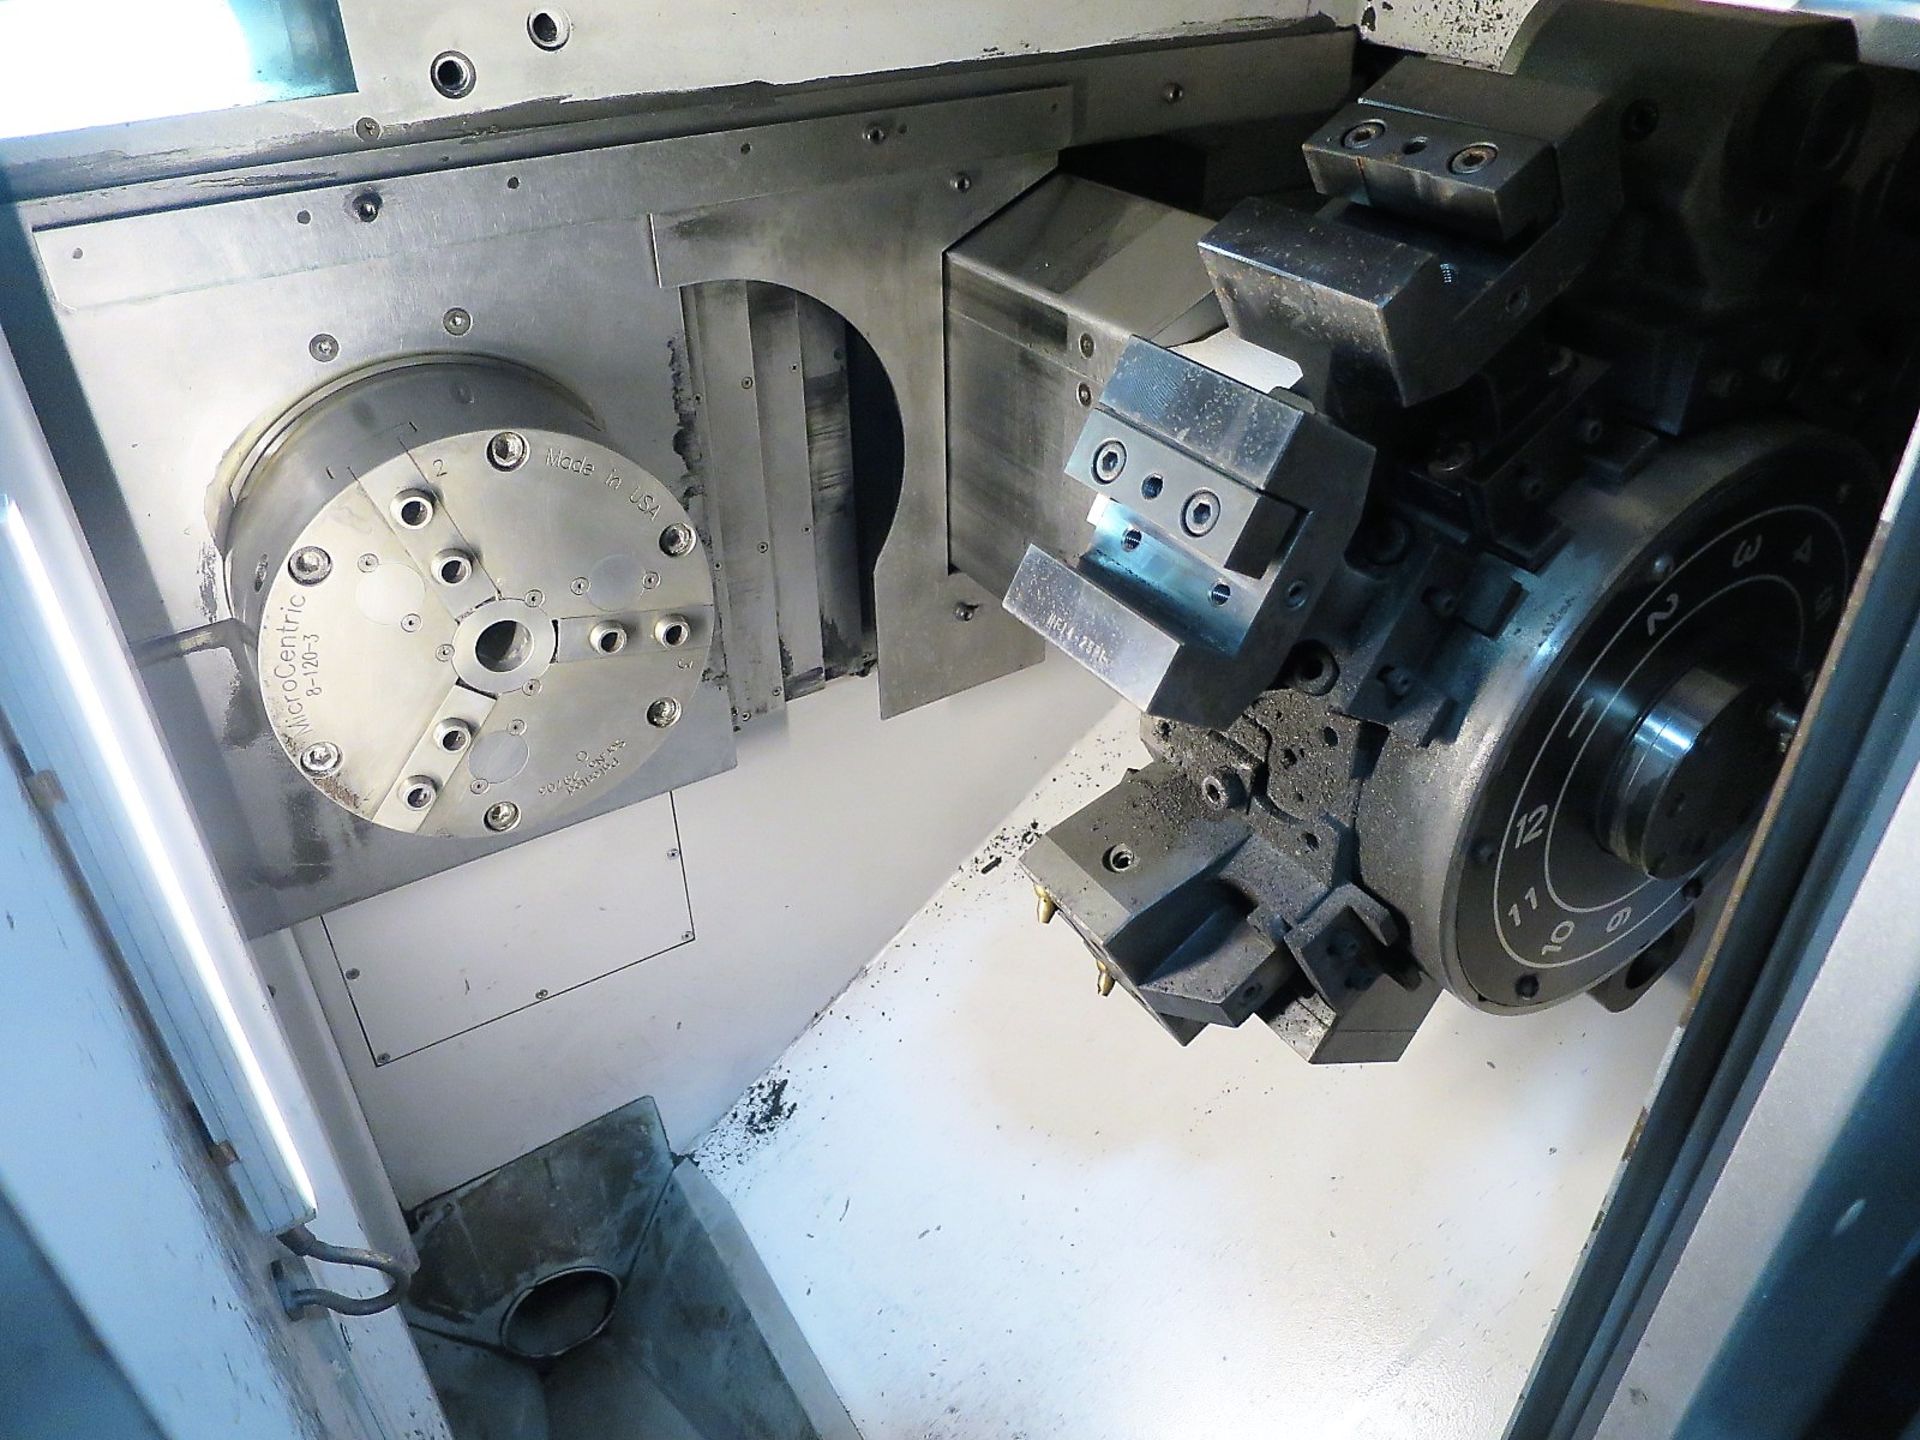 Okuma 2SP-150HM Twin Spindle 3-Axis Turning Center w/Live Milling, S/N 2SP-150HM, New 2011 - Image 5 of 12